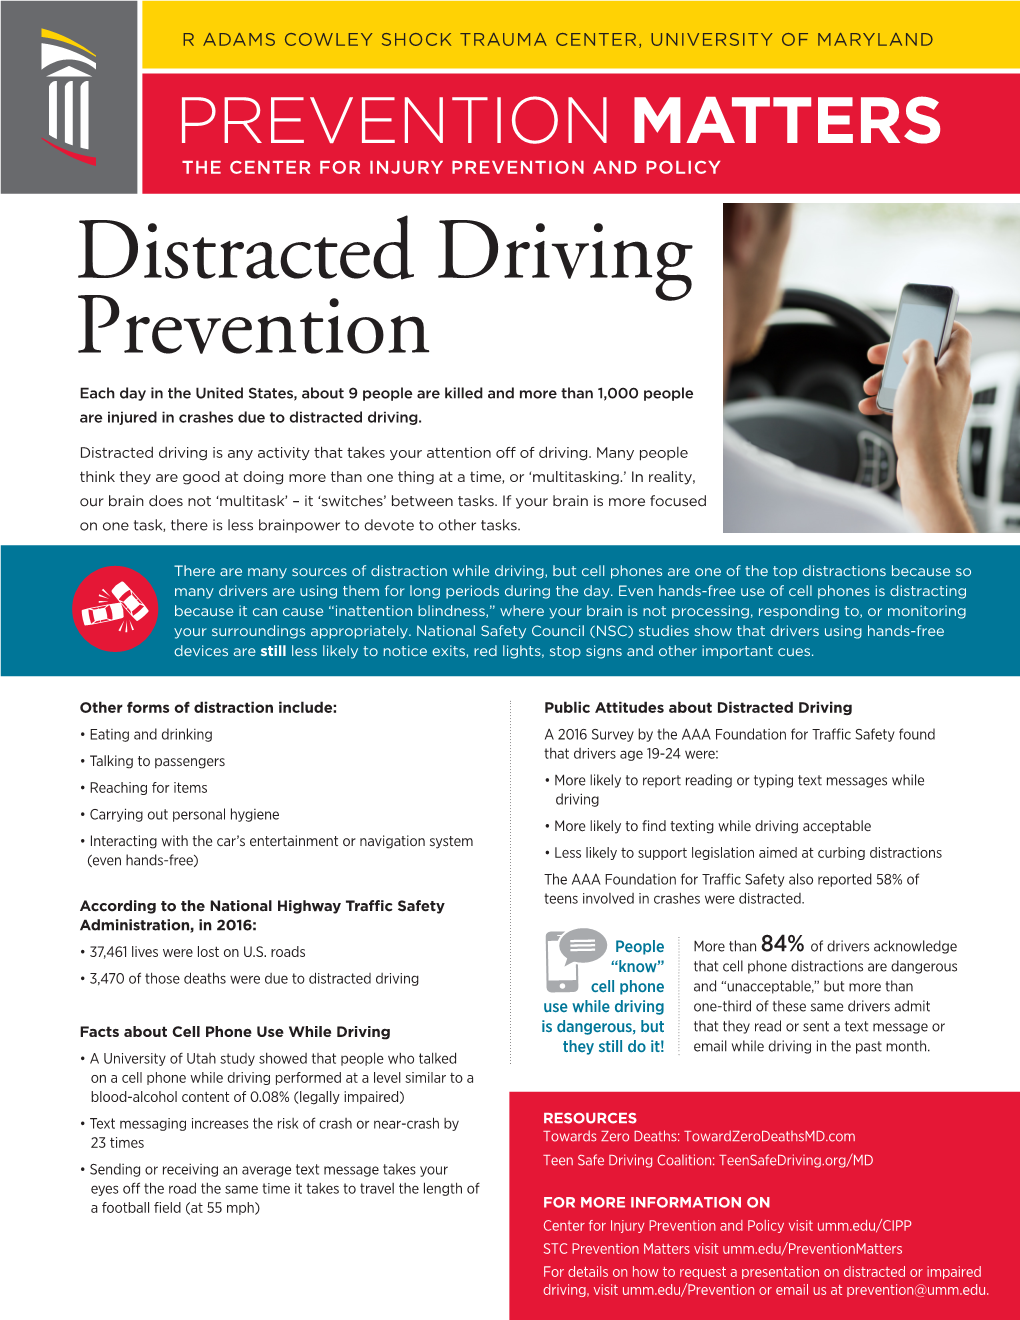 Distracted Driving Prevention Each Day in the United States, About 9 People Are Killed and More Than 1,000 People Are Injured in Crashes Due to Distracted Driving